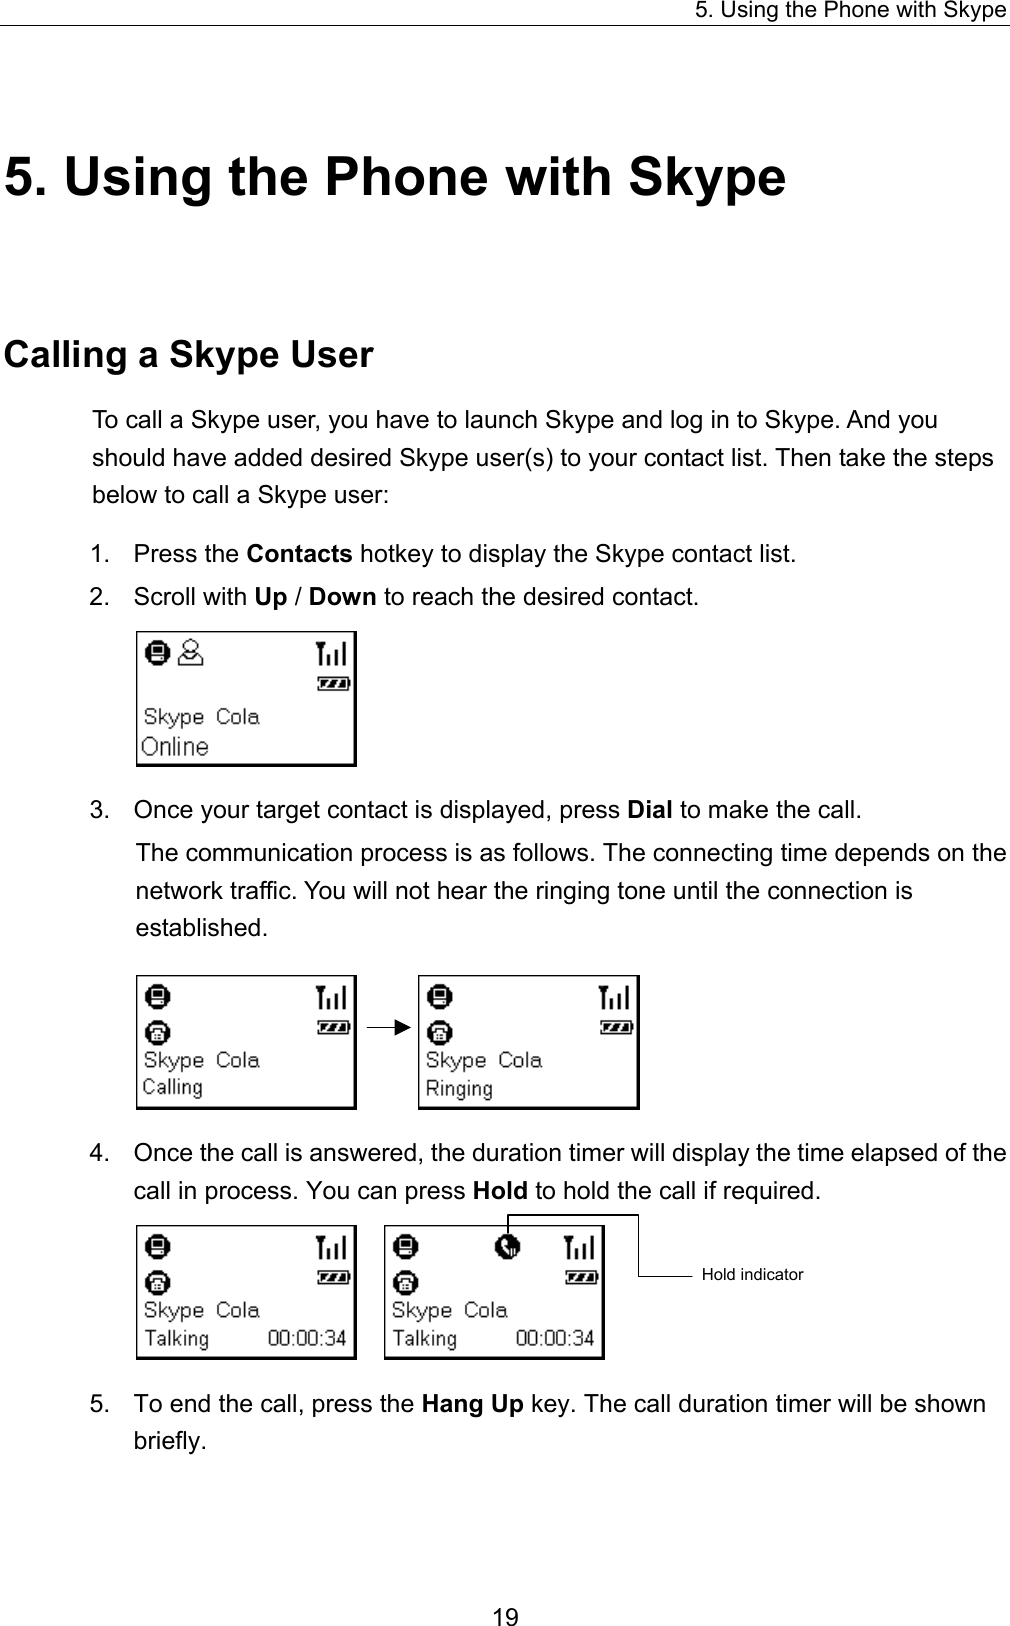 5. Using the Phone with Skype 5. Using the Phone with Skype Calling a Skype User To call a Skype user, you have to launch Skype and log in to Skype. And you should have added desired Skype user(s) to your contact list. Then take the steps below to call a Skype user:   1. Press the Contacts hotkey to display the Skype contact list.   2. Scroll with Up / Down to reach the desired contact.    3.  Once your target contact is displayed, press Dial to make the call.   The communication process is as follows. The connecting time depends on the network traffic. You will not hear the ringing tone until the connection is established.    4.  Once the call is answered, the duration timer will display the time elapsed of the call in process. You can press Hold to hold the call if required.        Hold indicator 5.  To end the call, press the Hang Up key. The call duration timer will be shown briefly. 19 